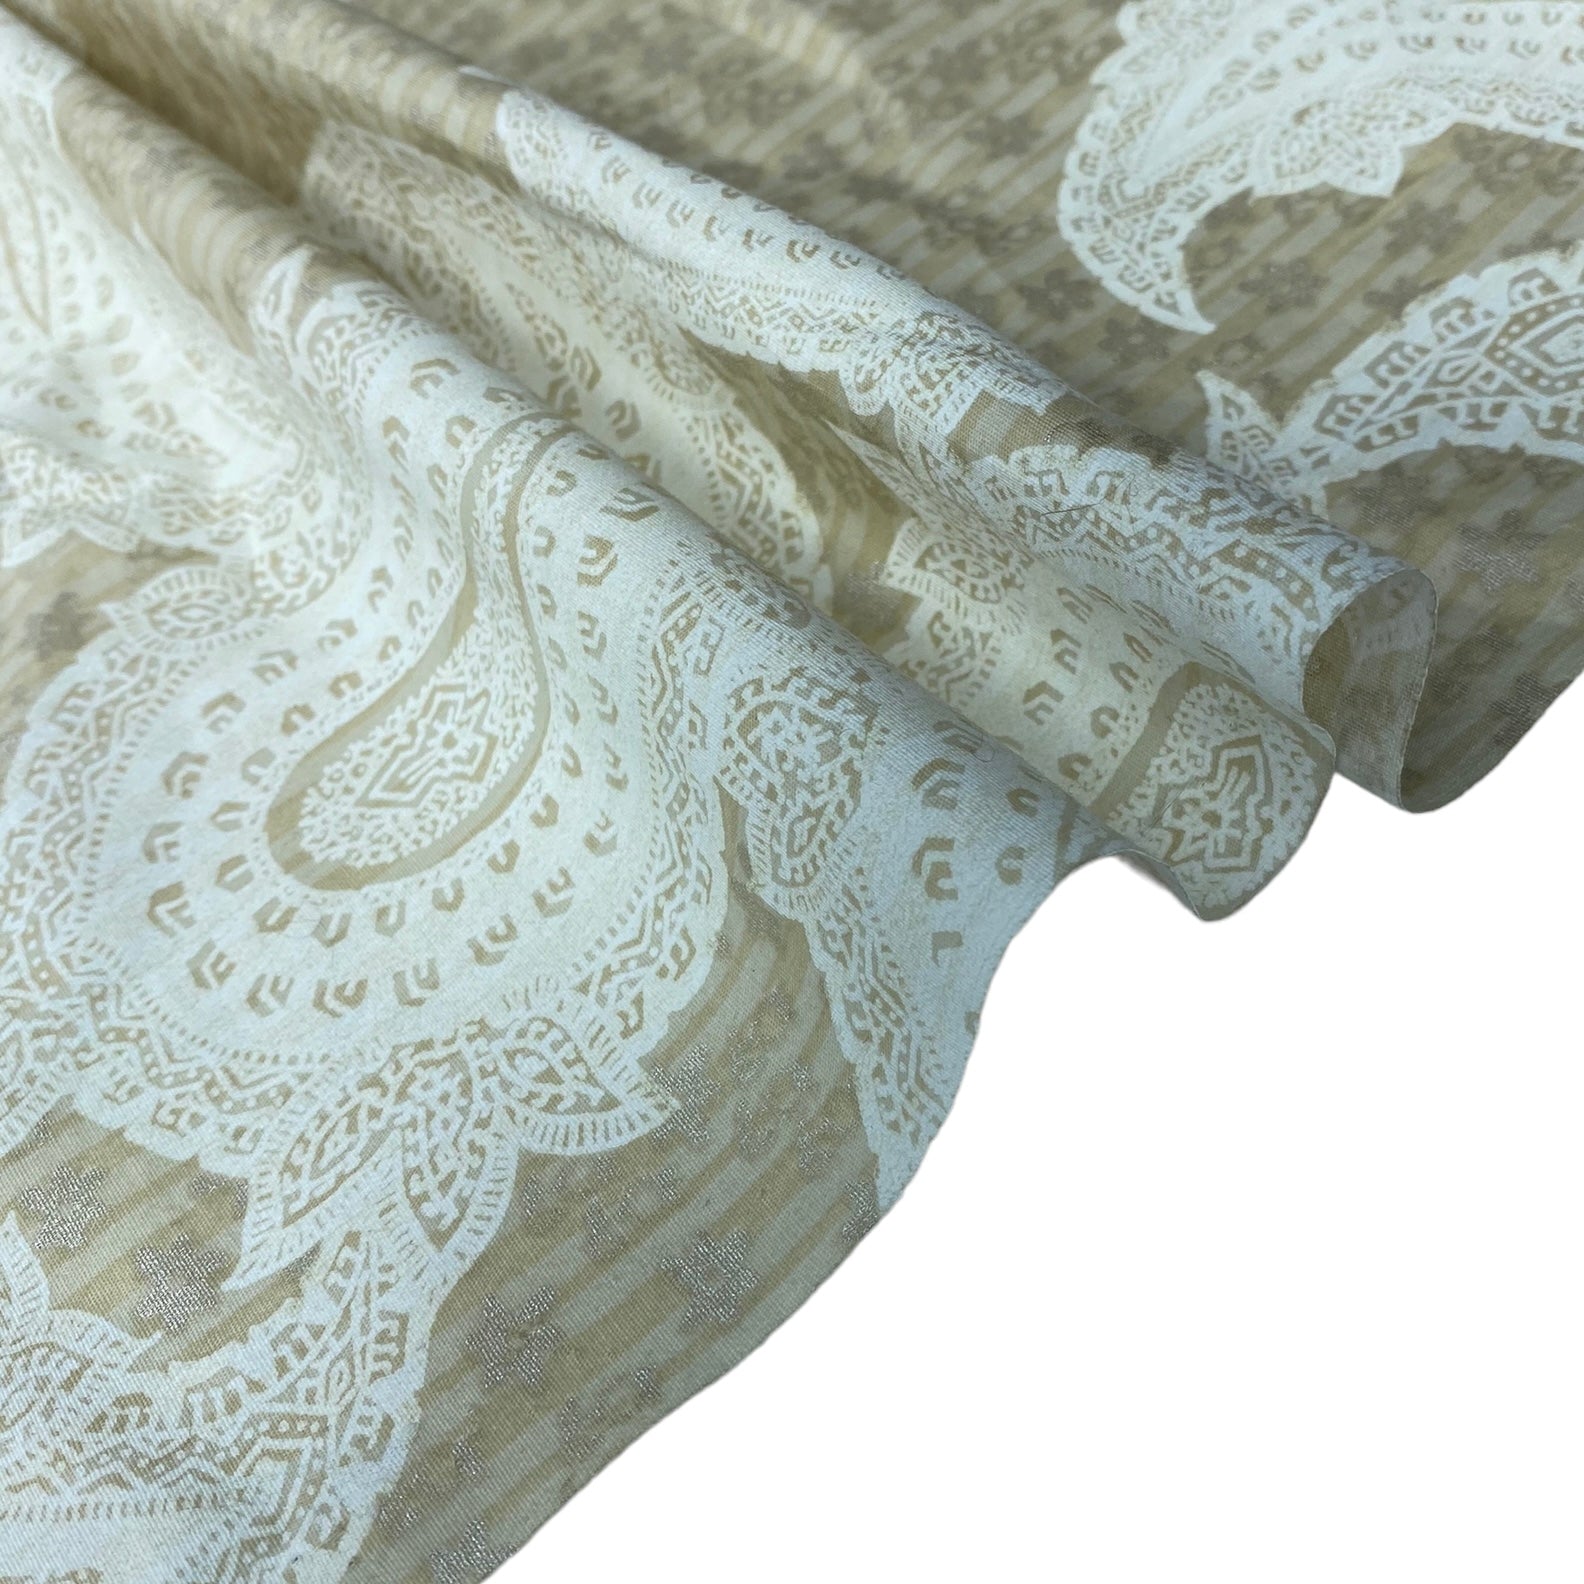 Large Paisley Printed Stretch Cotton - Beige/Silver